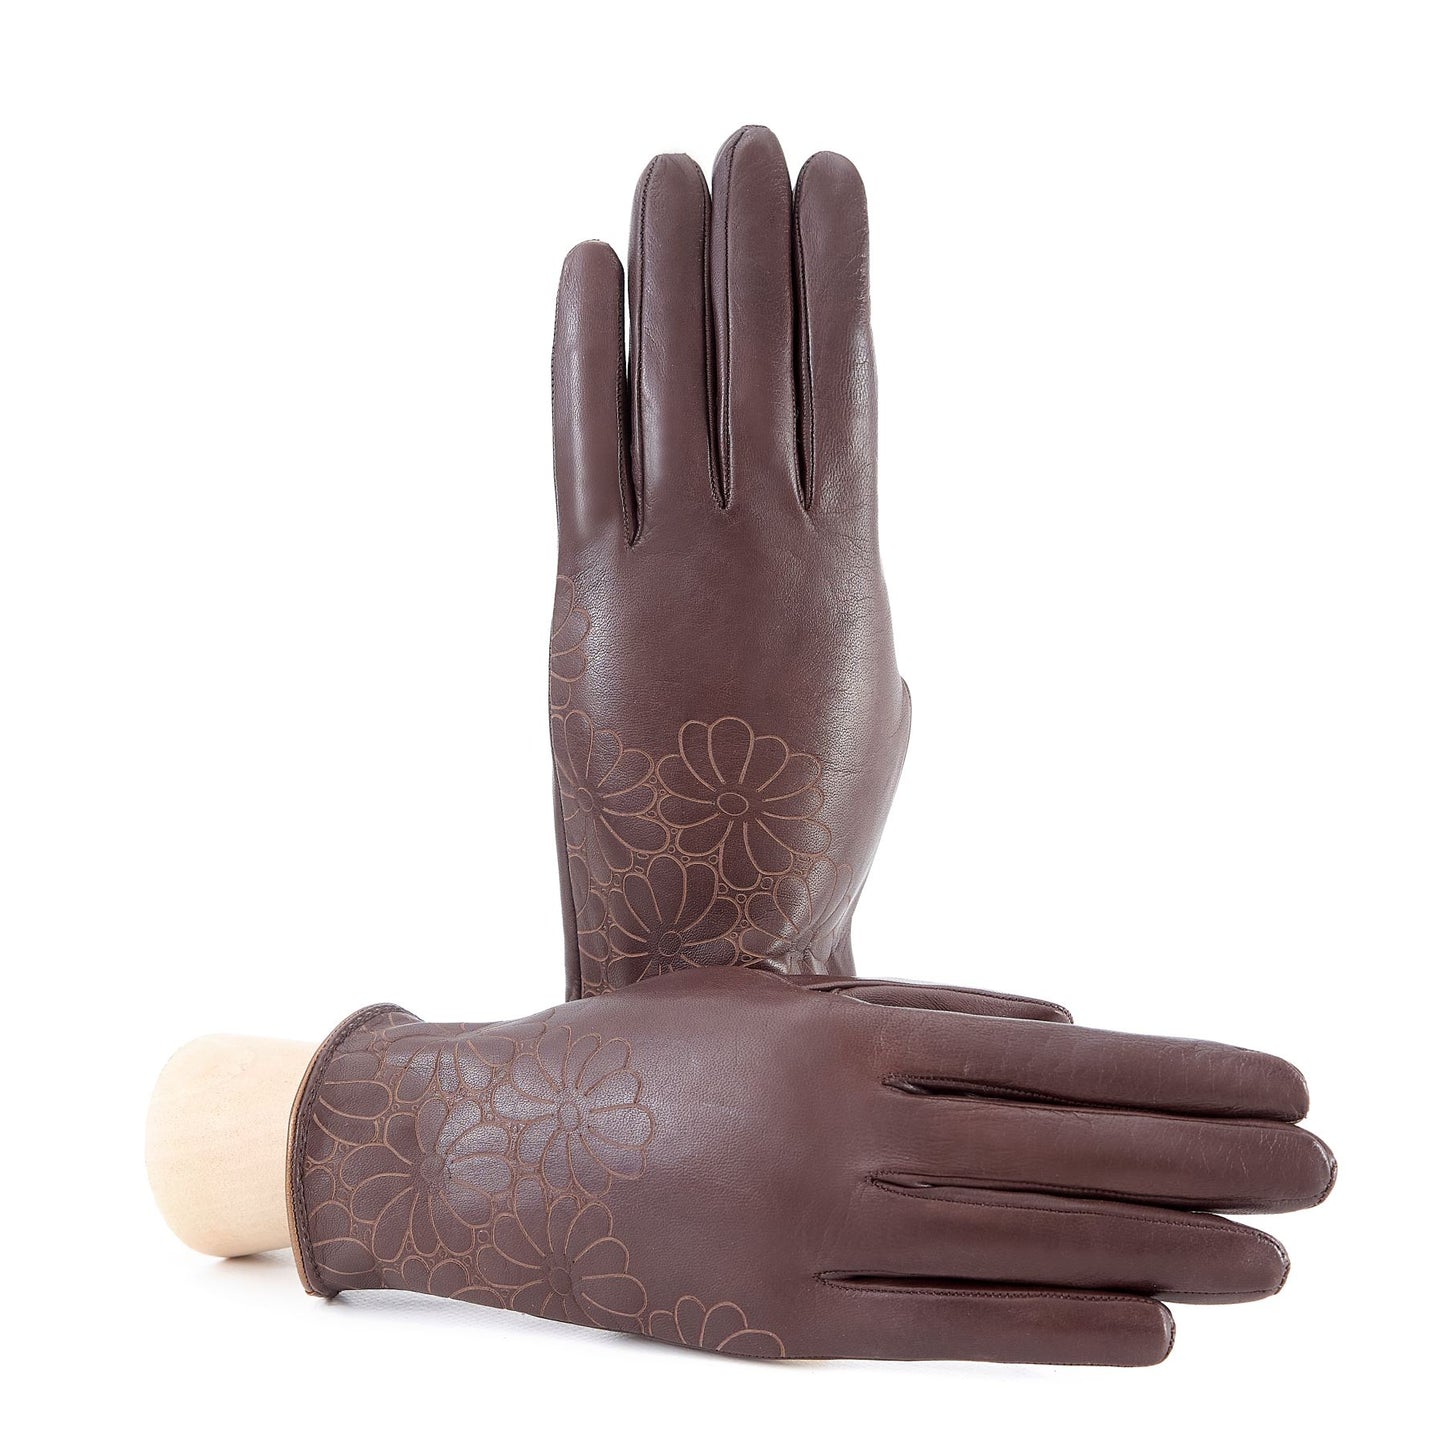 Women's unlined brown nappa leather gloves with floral detail